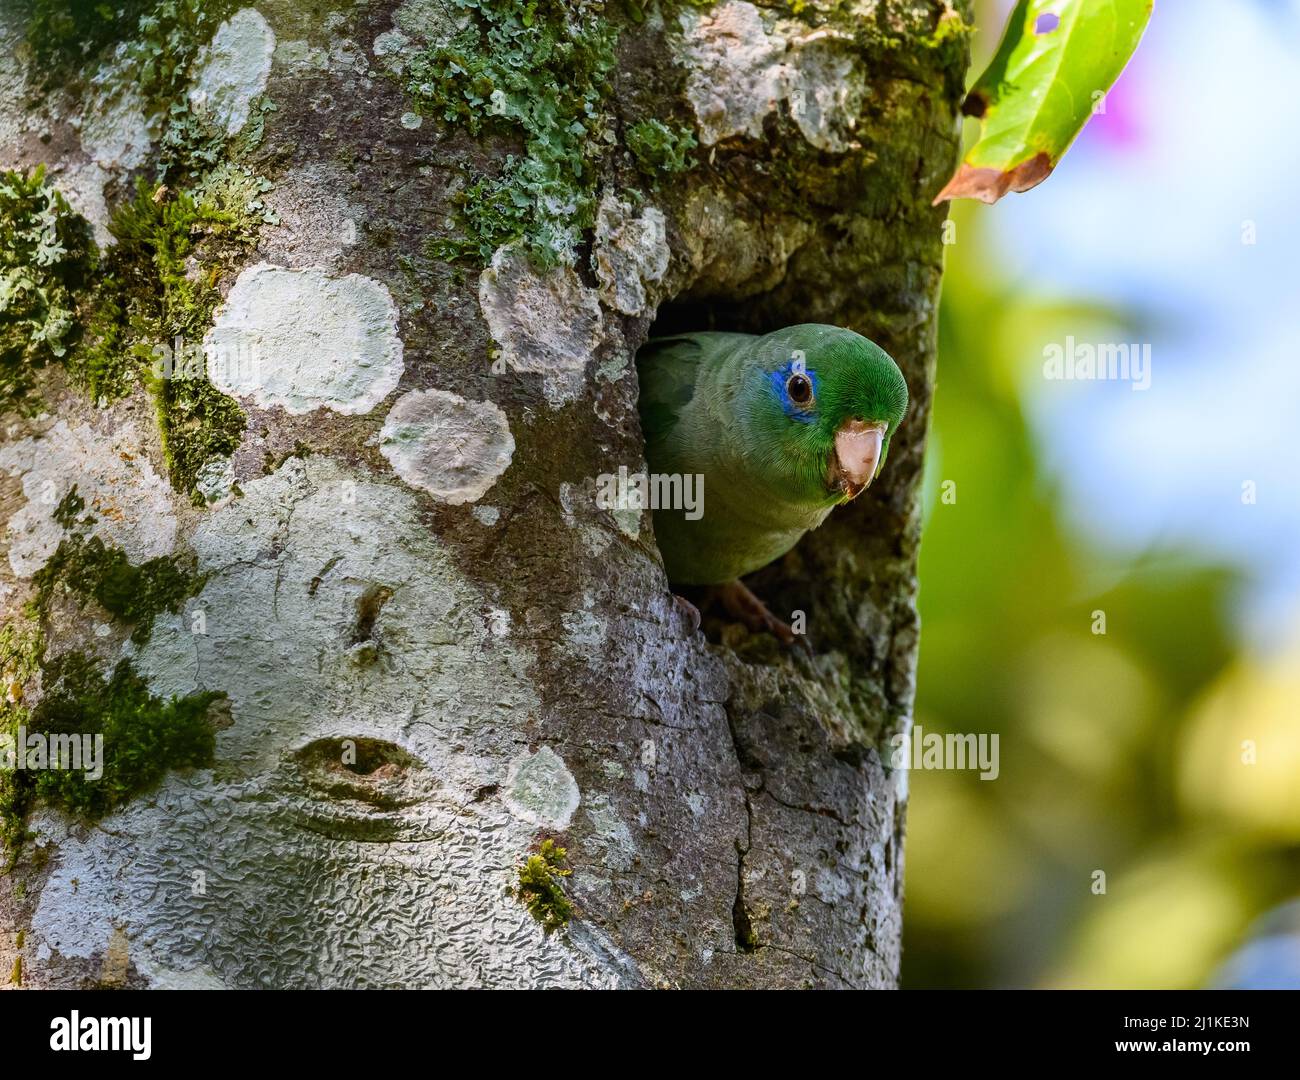 A Spectacled Parrotlet (Forpus conspicillatus) peeking out his nesting hole in a tree. Colombia, South America. Stock Photo